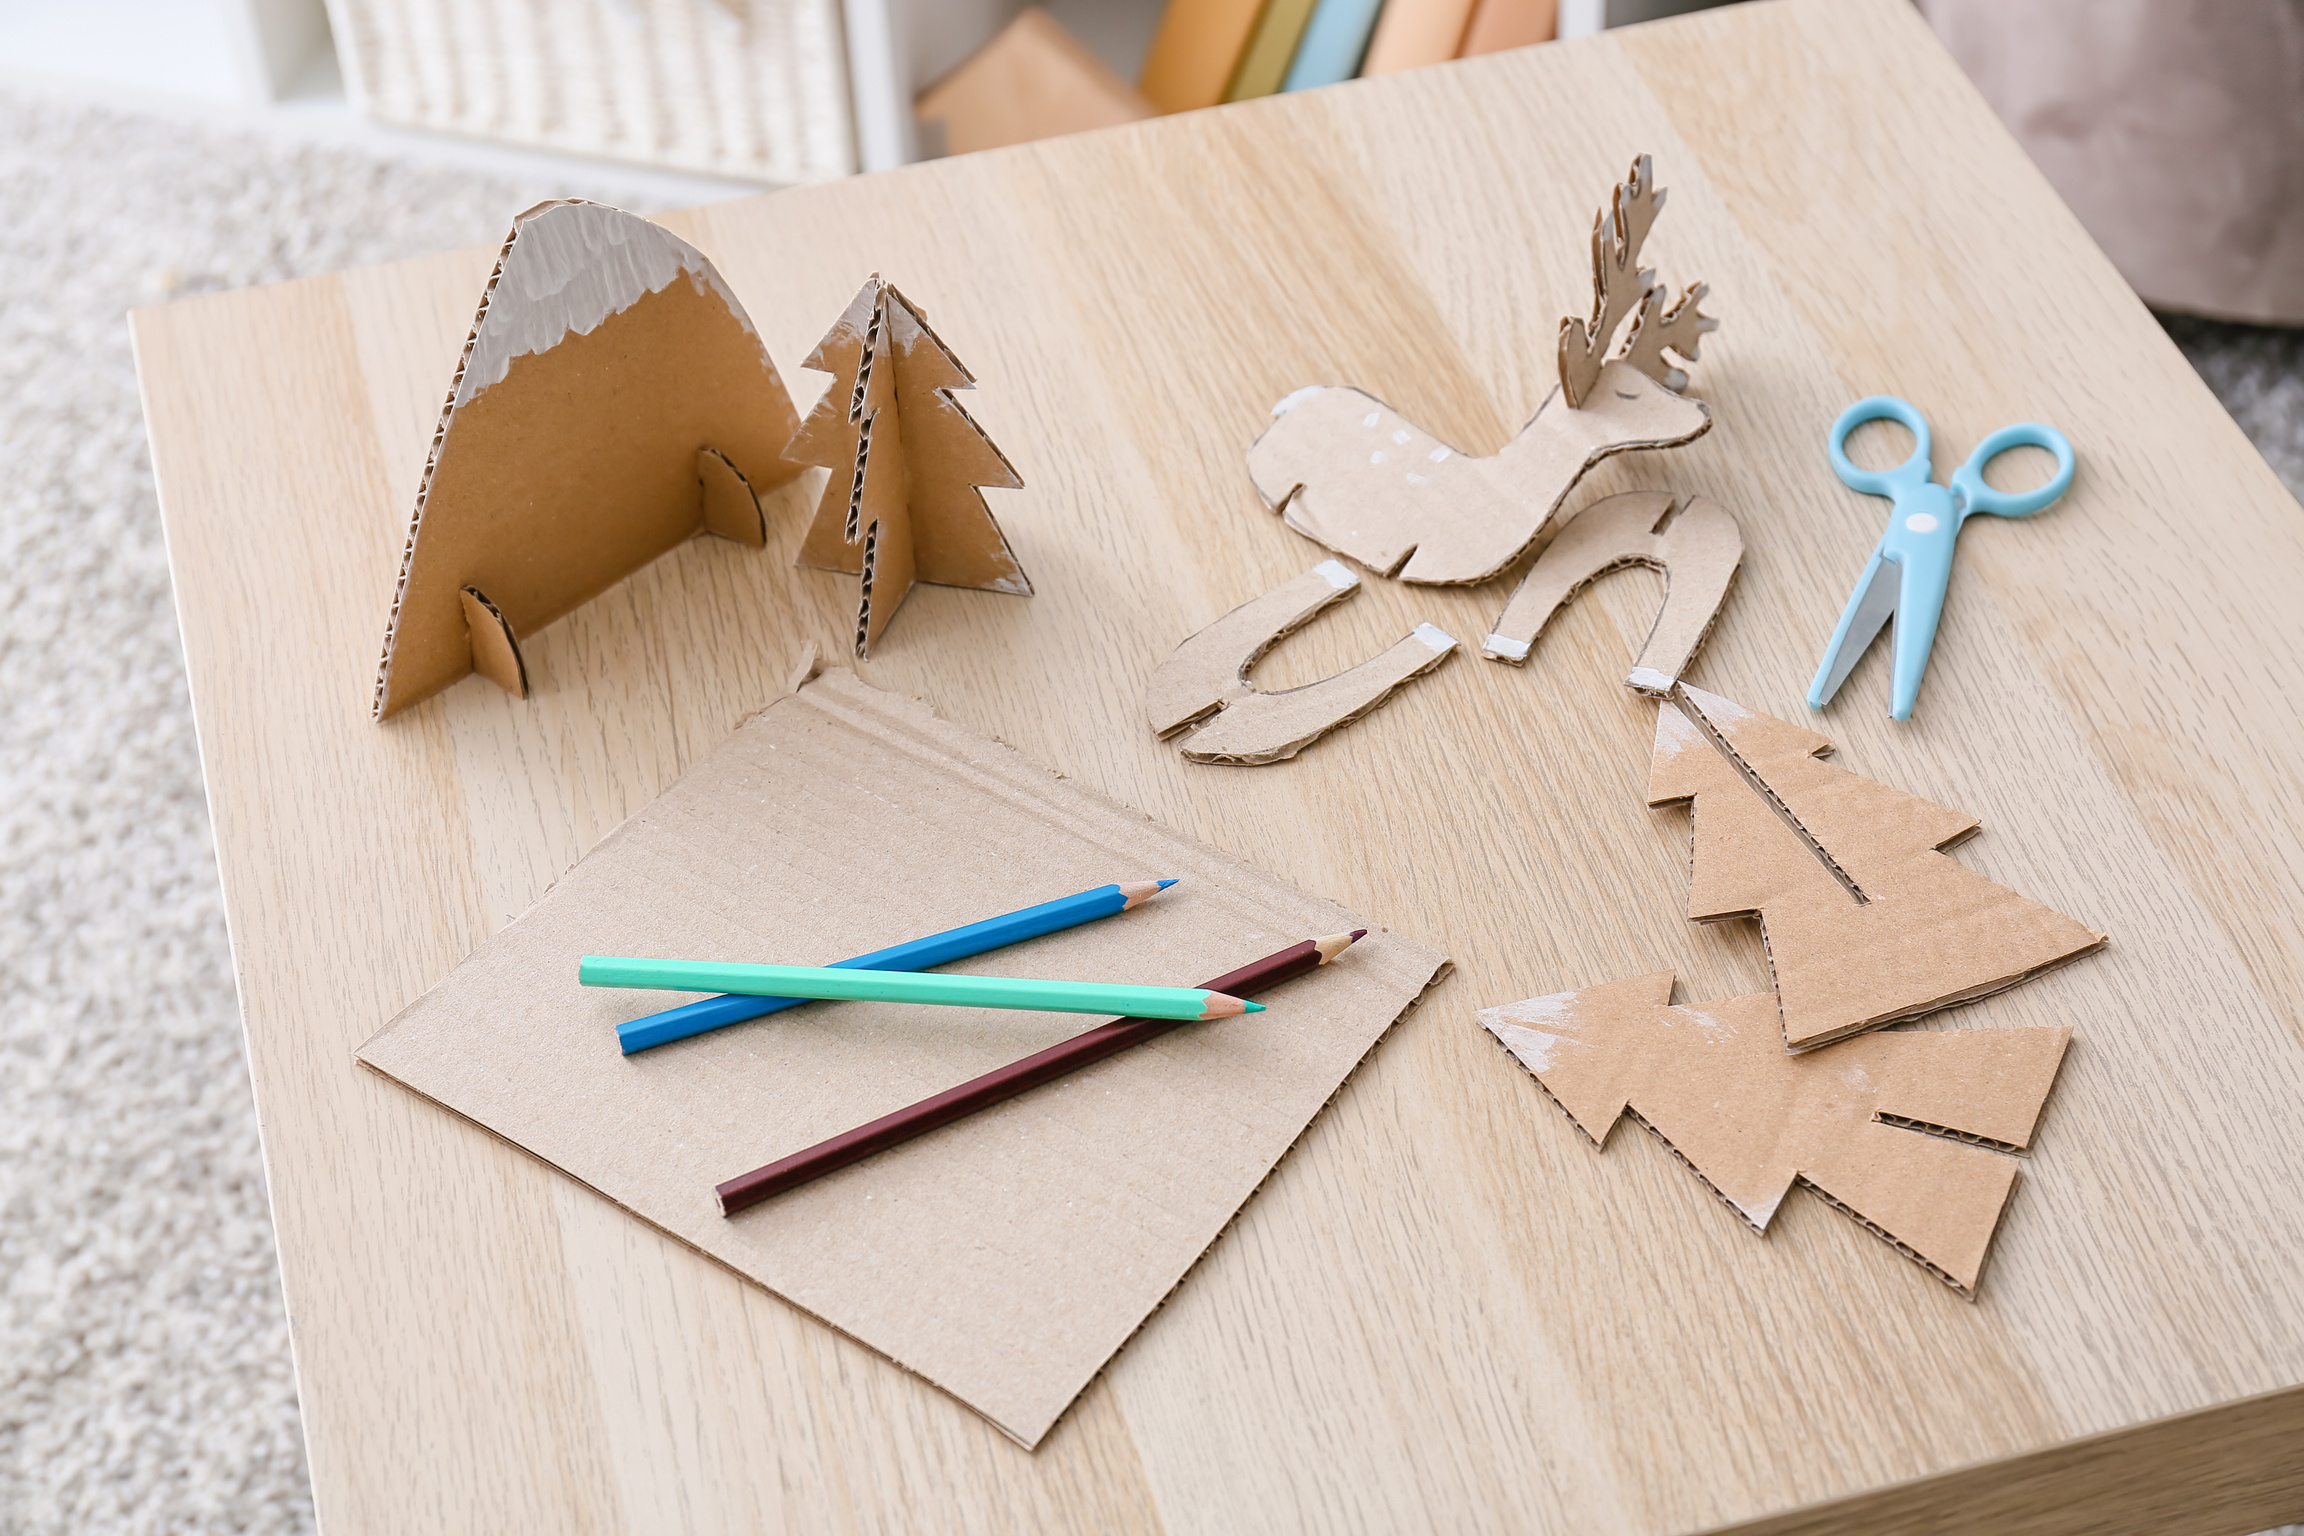 Handmade Cardboard Toys and Stationery Supplies on Wooden Table